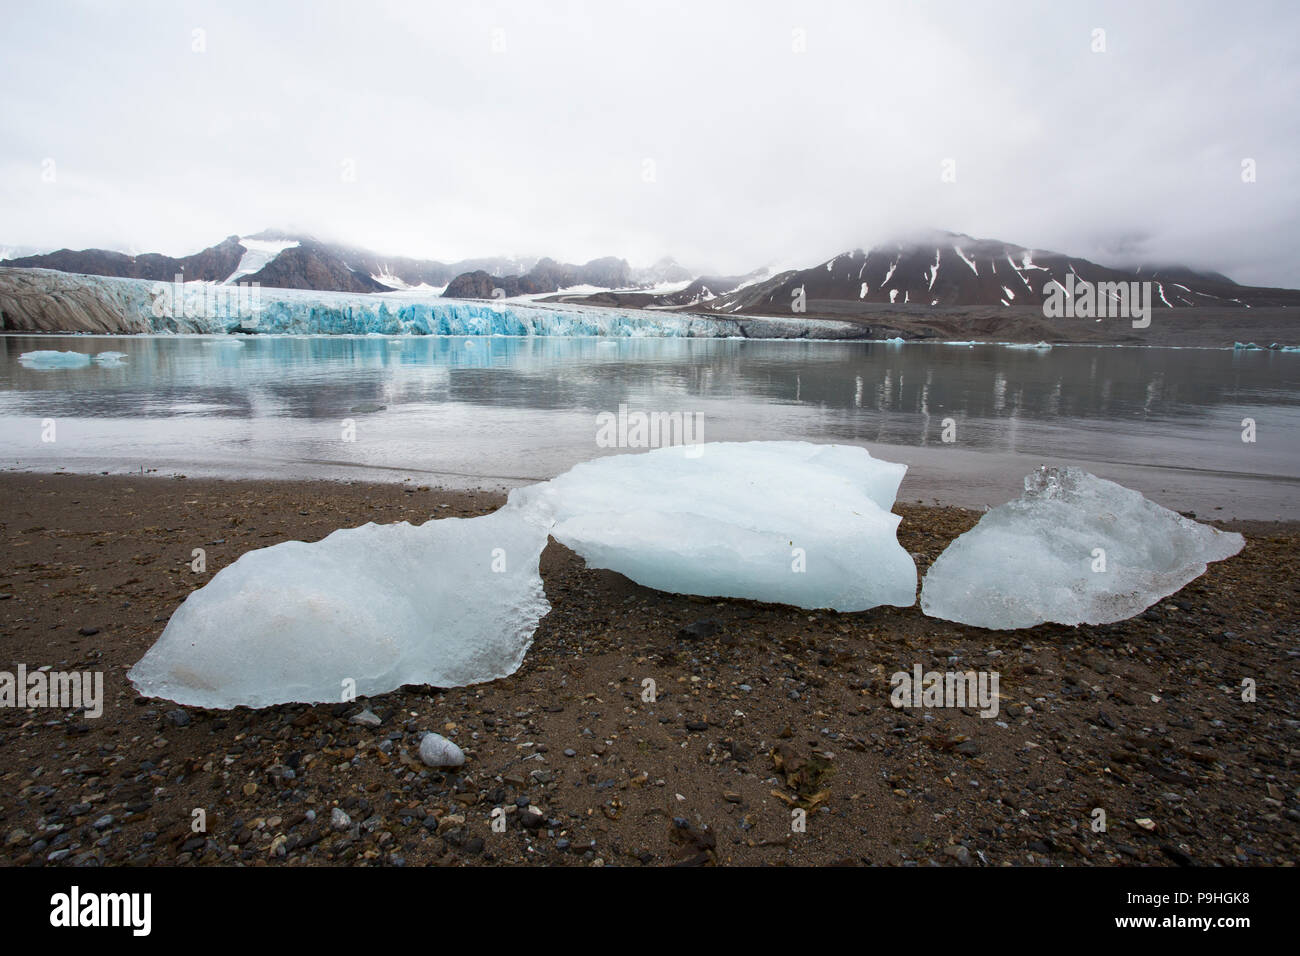 Glacial ice on the shore with Fourteenth of July Glacier in the background, Svalbard Stock Photo